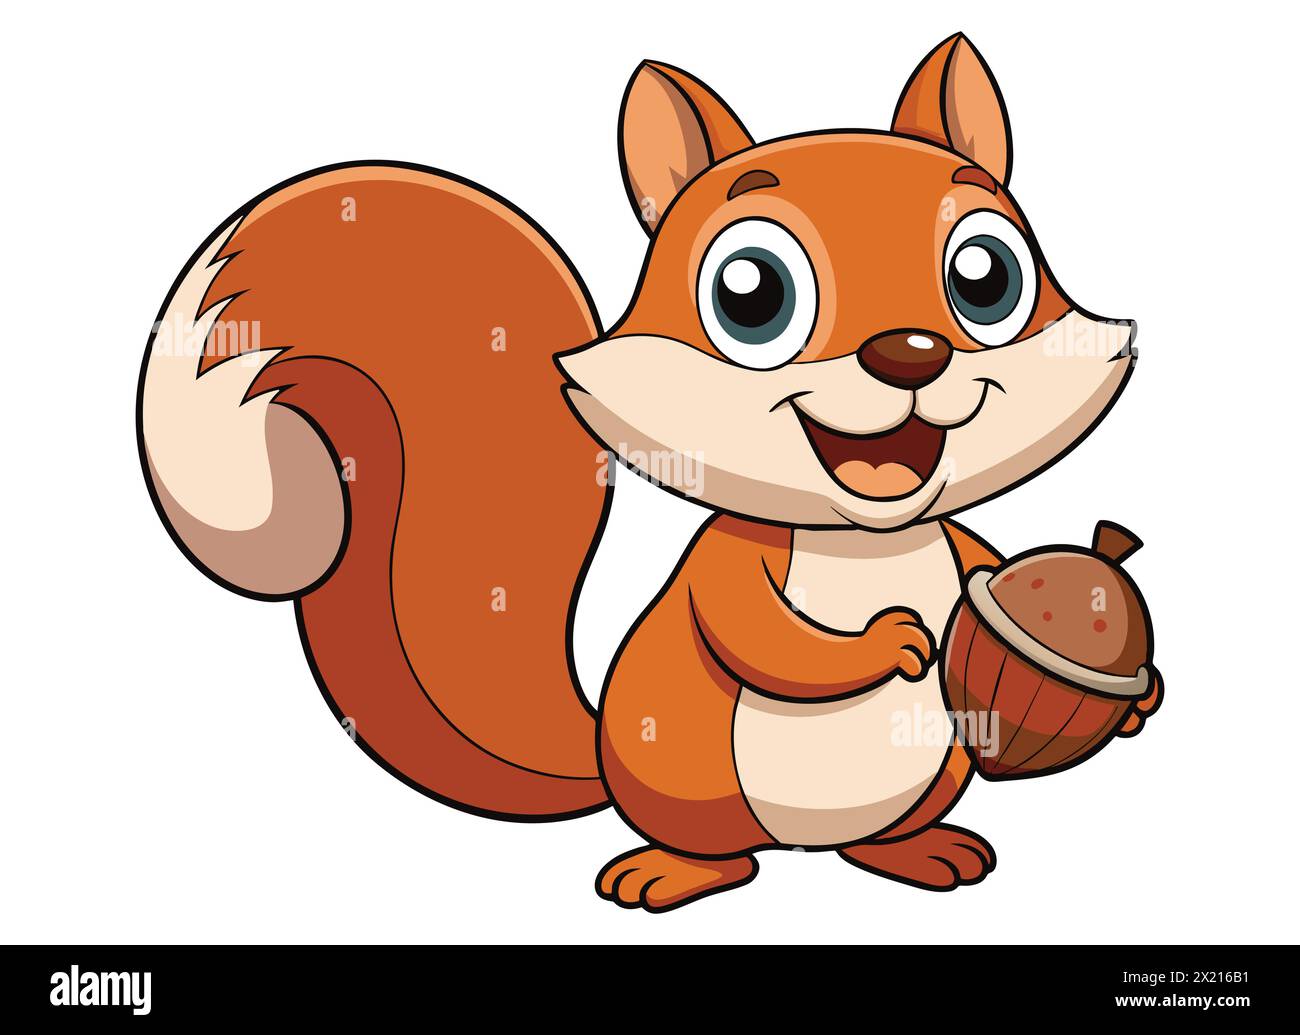 Cheerful Squirrel Holding Acorn. Playful Squirrel Cartoon. Adorable Squirrel Character with Nut Stock Vector